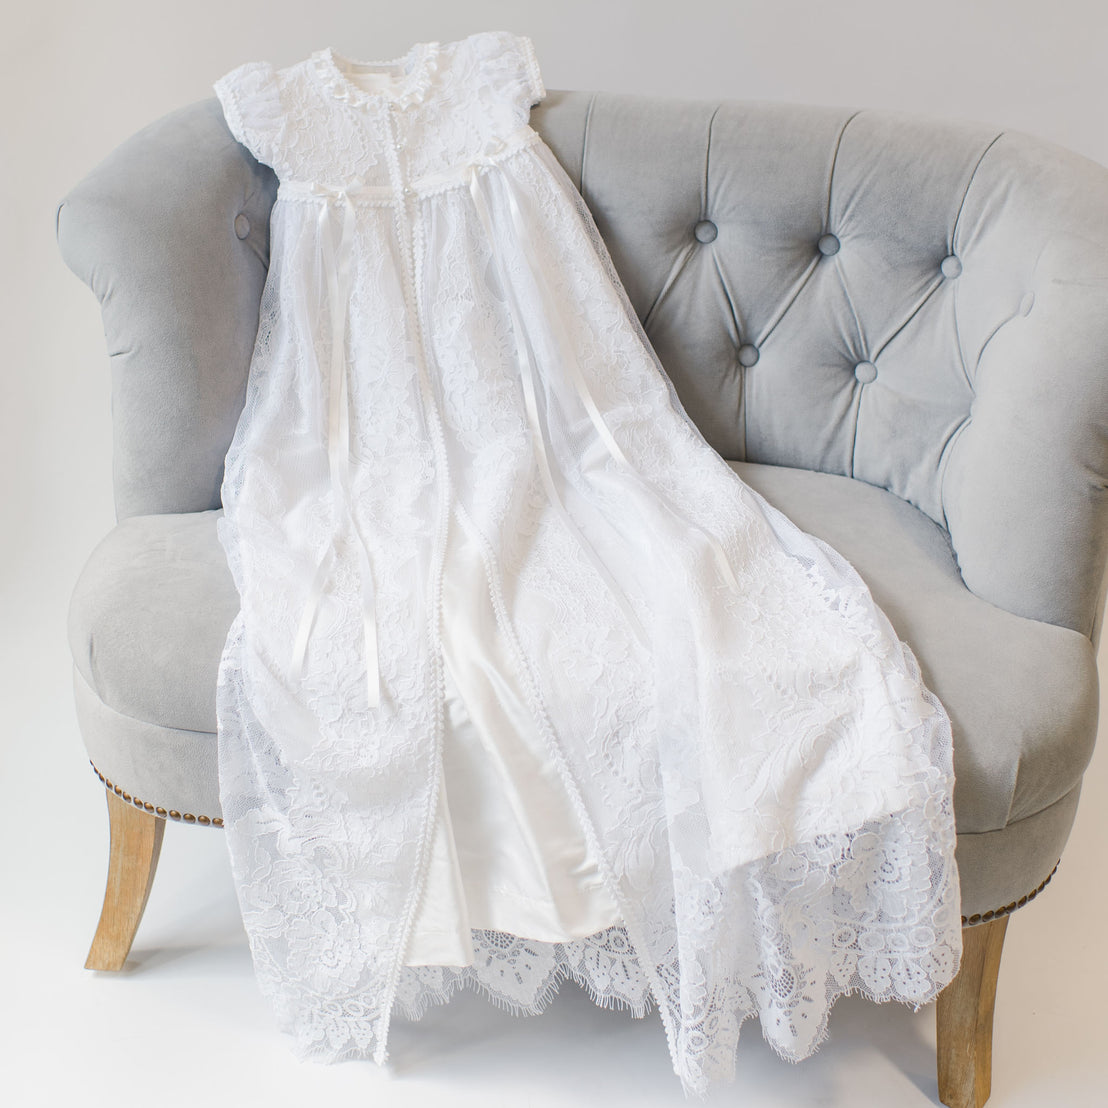 An elegant Aria Christening Gown & Bonnet draped over a gray sofa, showcasing intricate patterns and a long flowing design.